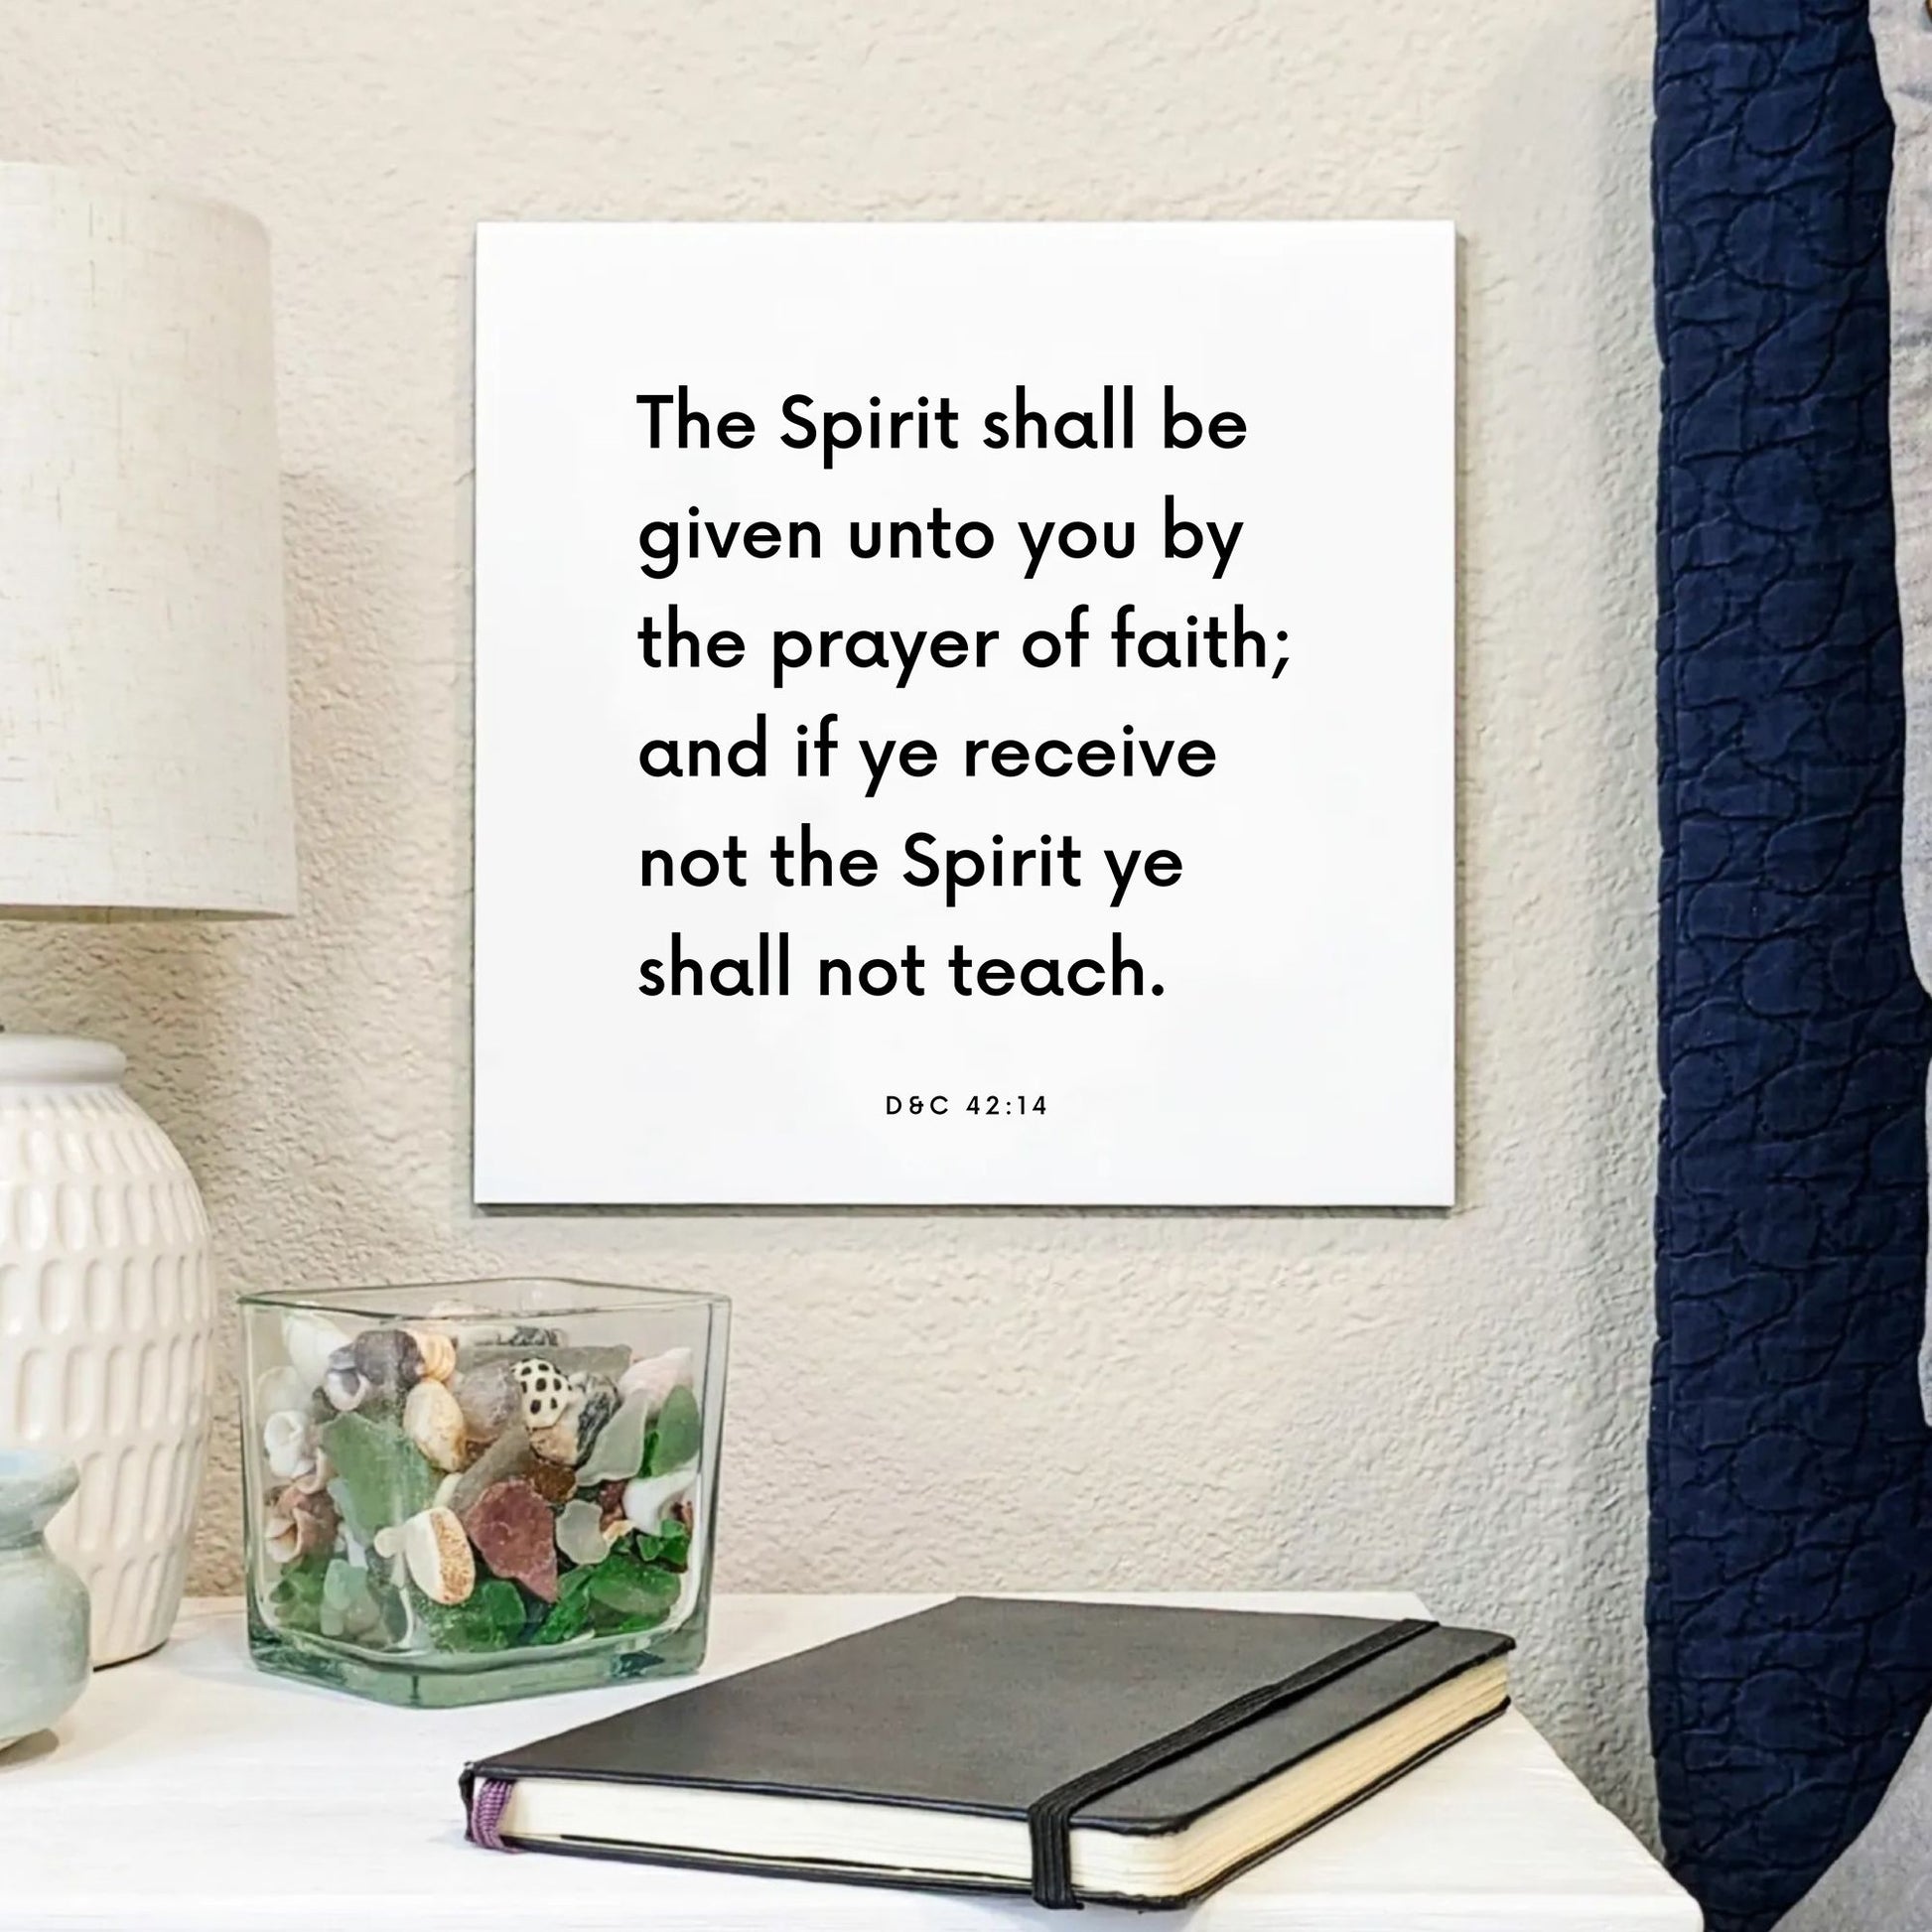 Bedside mouting of the scripture tile for D&C 42:14 - "If ye receive not the Spirit ye shall not teach"